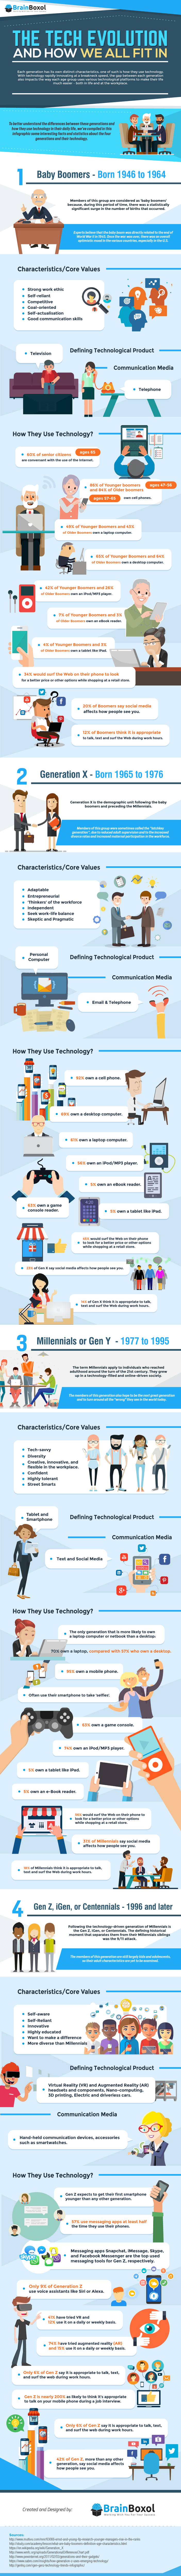 The Tech Evolution And How We All Fit In - #Infographic